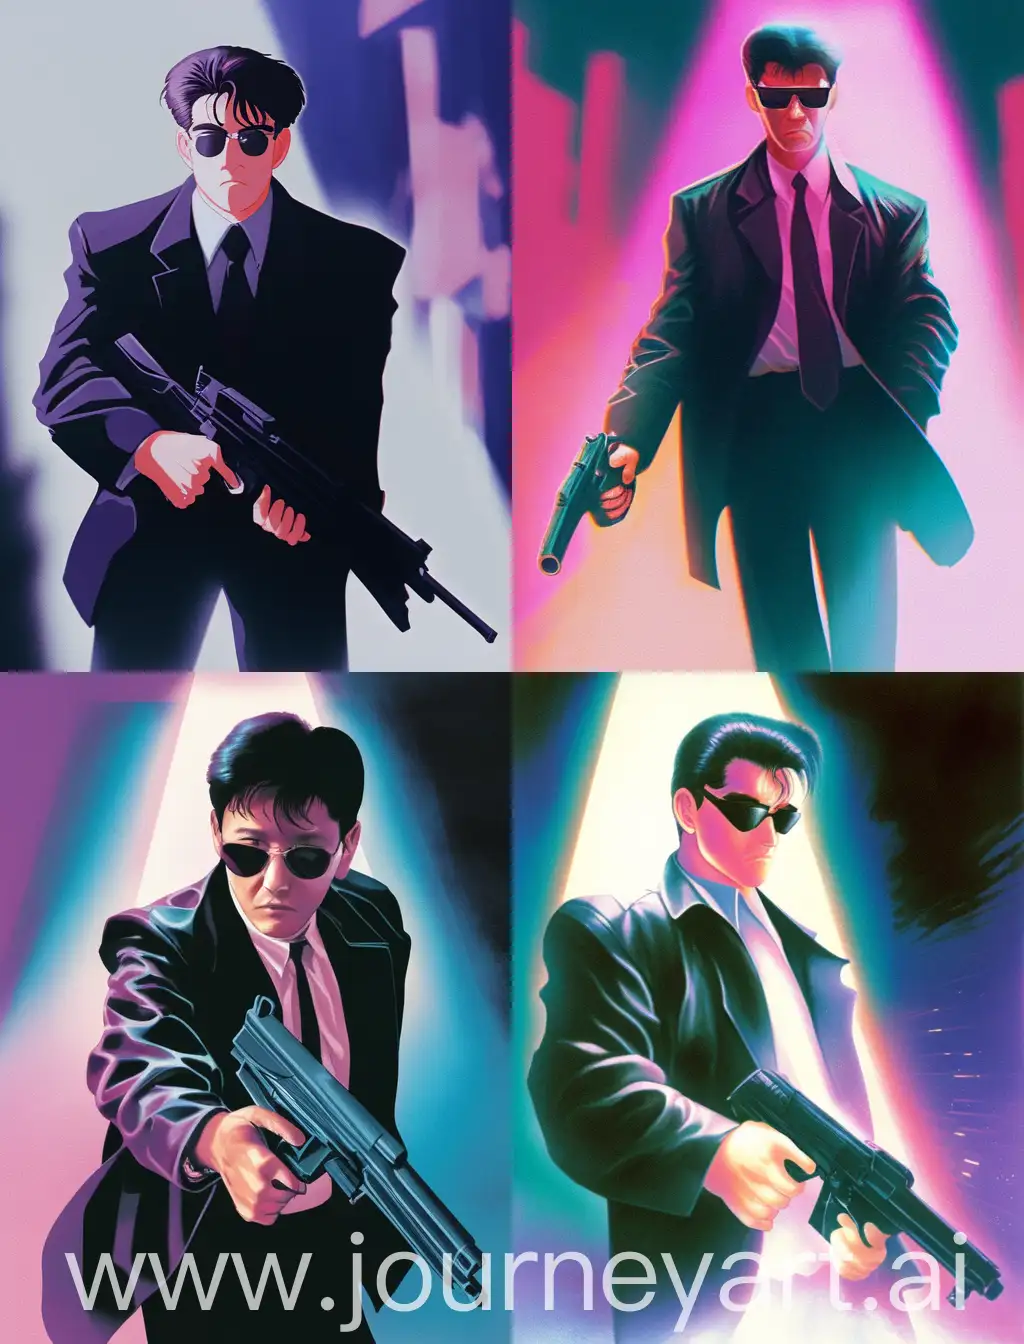 masterpiece, best quality, faded pastel illustration of A Better Tomorrow (1986 Hong Kong action film) , Mark Lee, Black coat with black suit, shirt, black trousers and sunglasses, holding gun in both hands, 